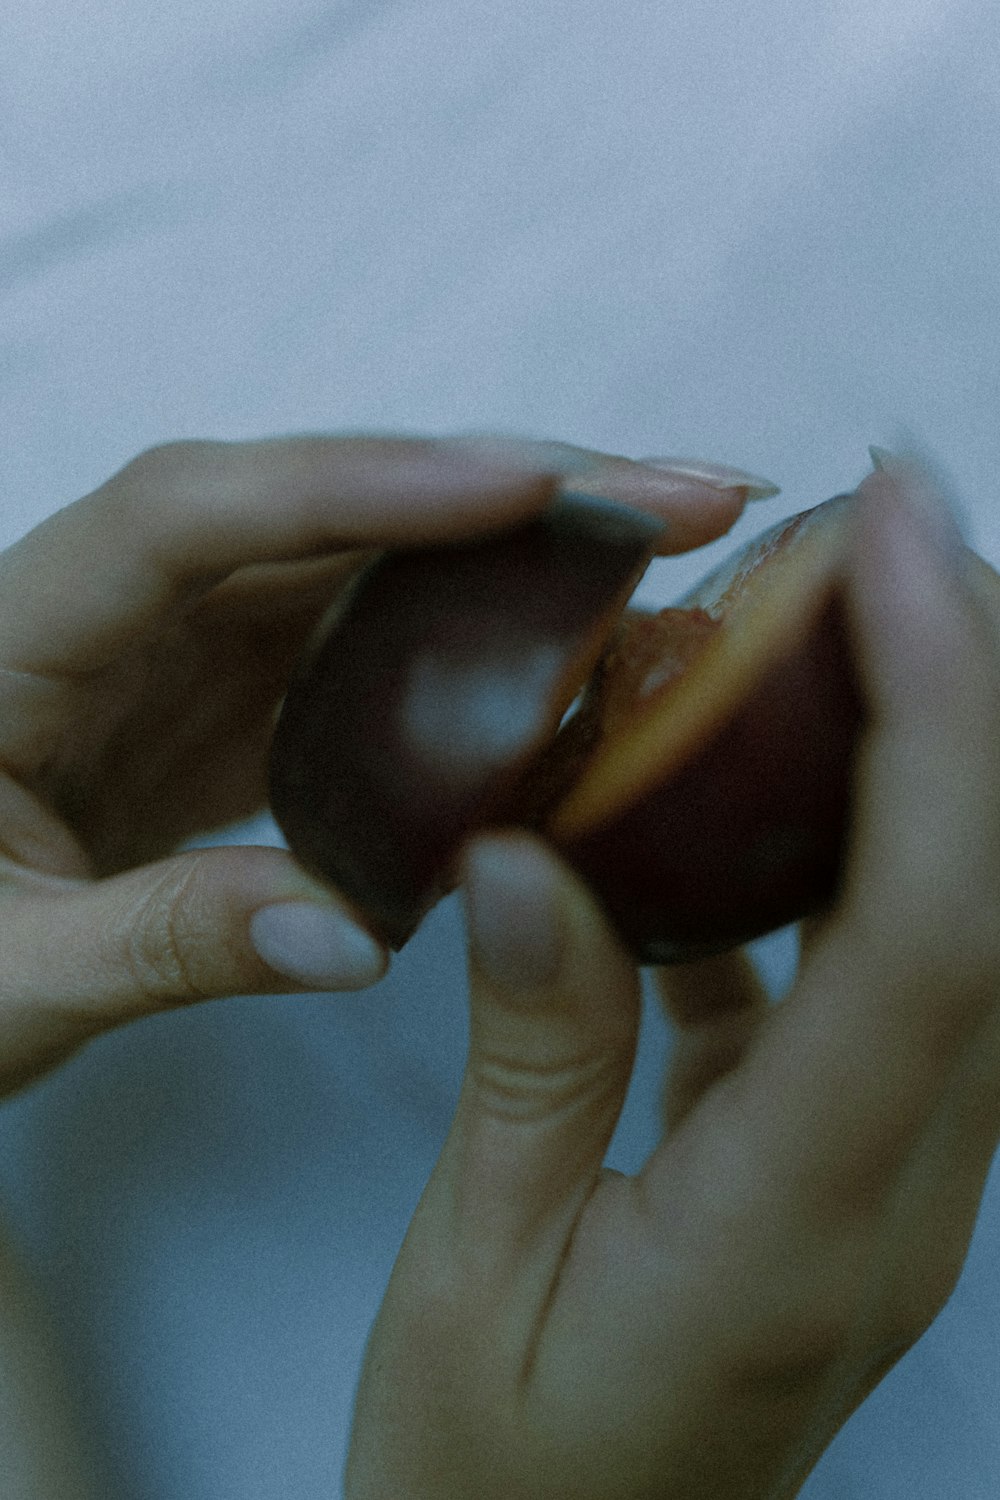 a person holding an apple with a bite taken out of it